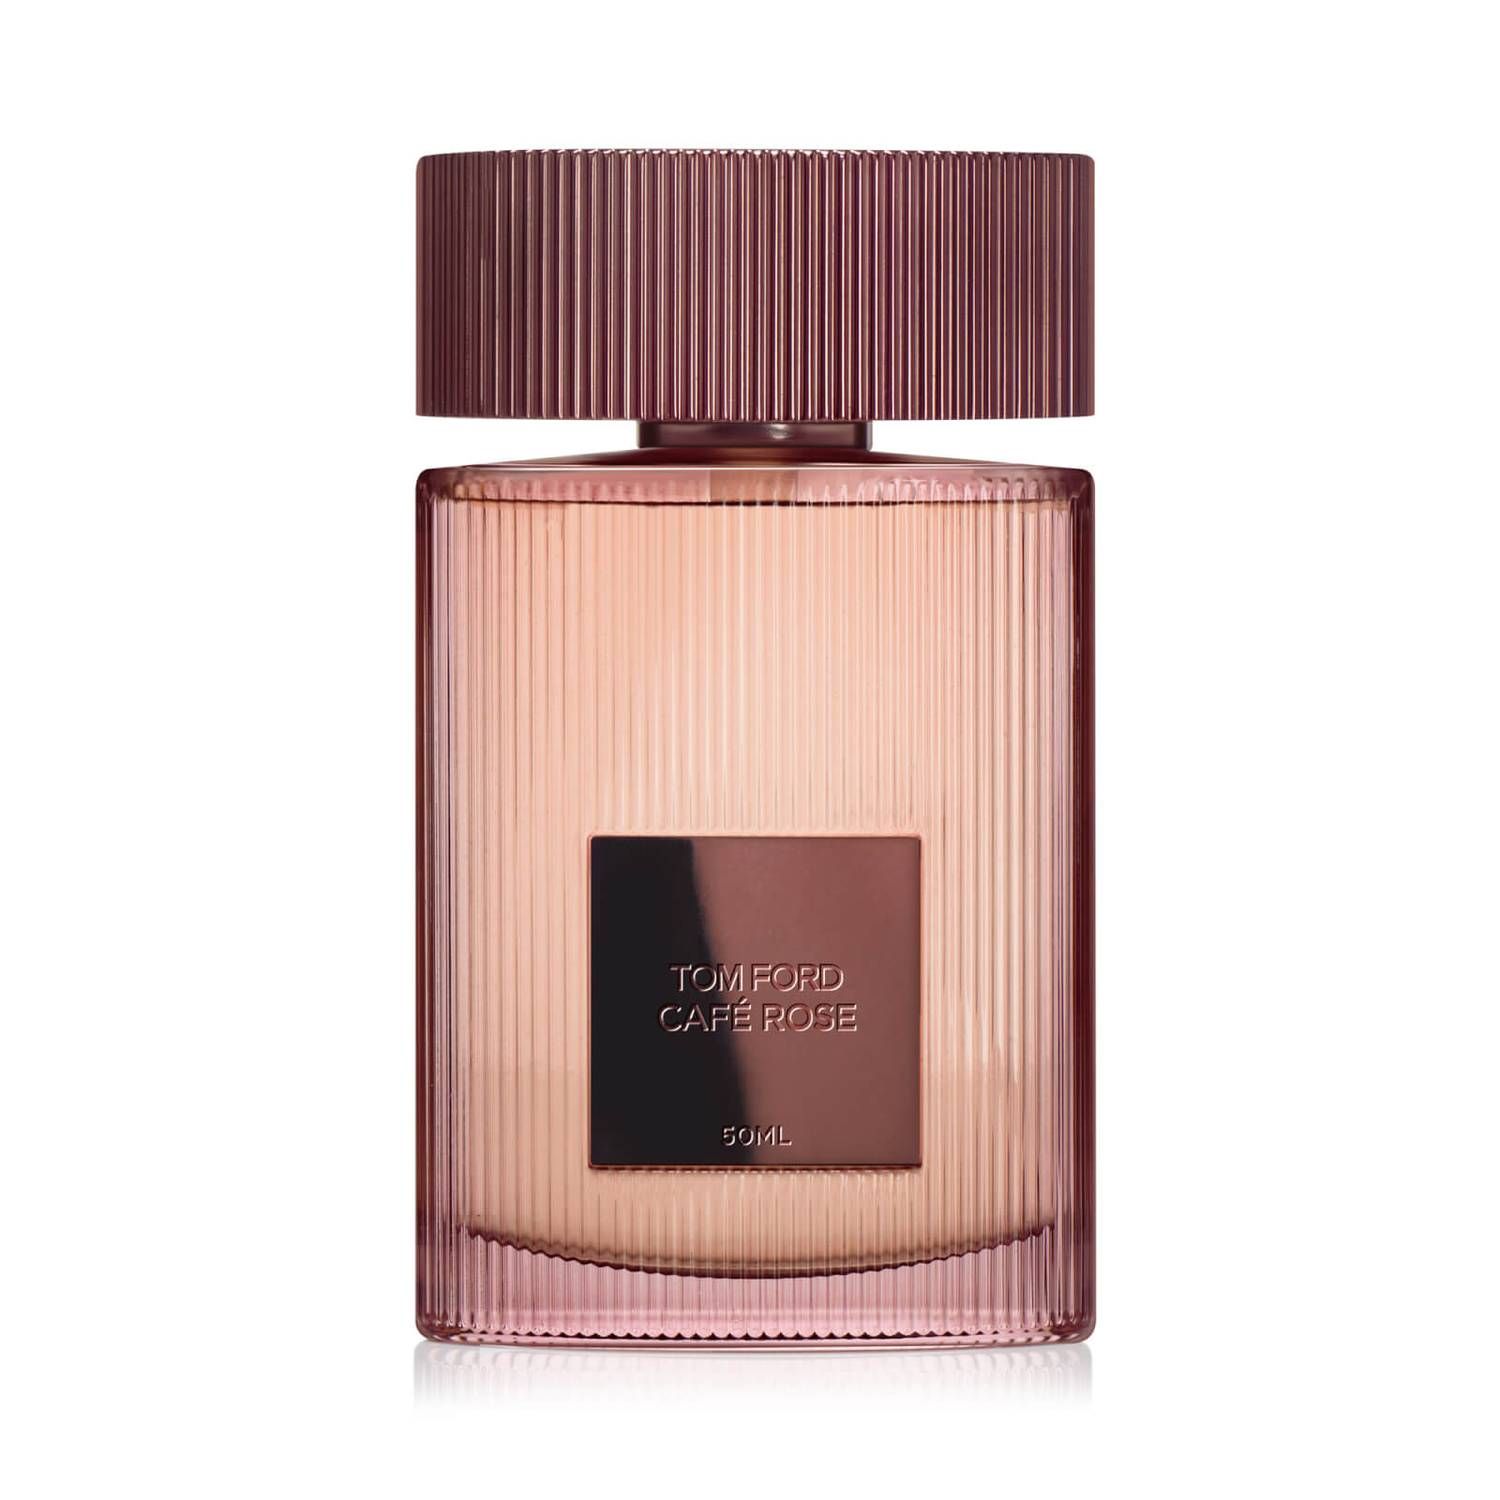 The Tom Ford Café Rose Eau de Parfum captures the untamed sensuality of a refined rose spiked wi... | Look Fantastic (ROW)